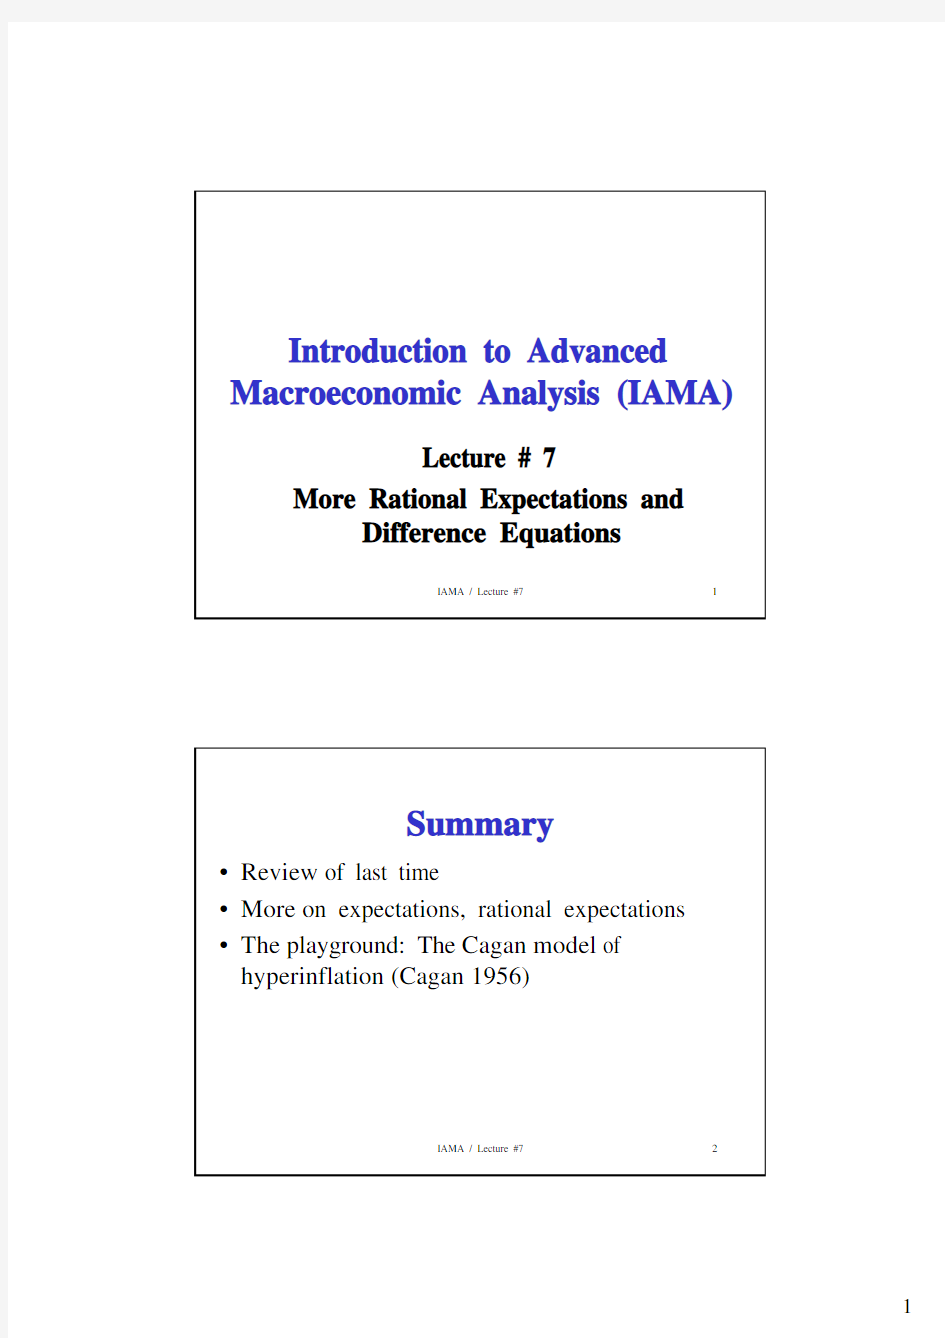 Ch07More Rational Expectations and Difference Equations(Michael C. Burda)